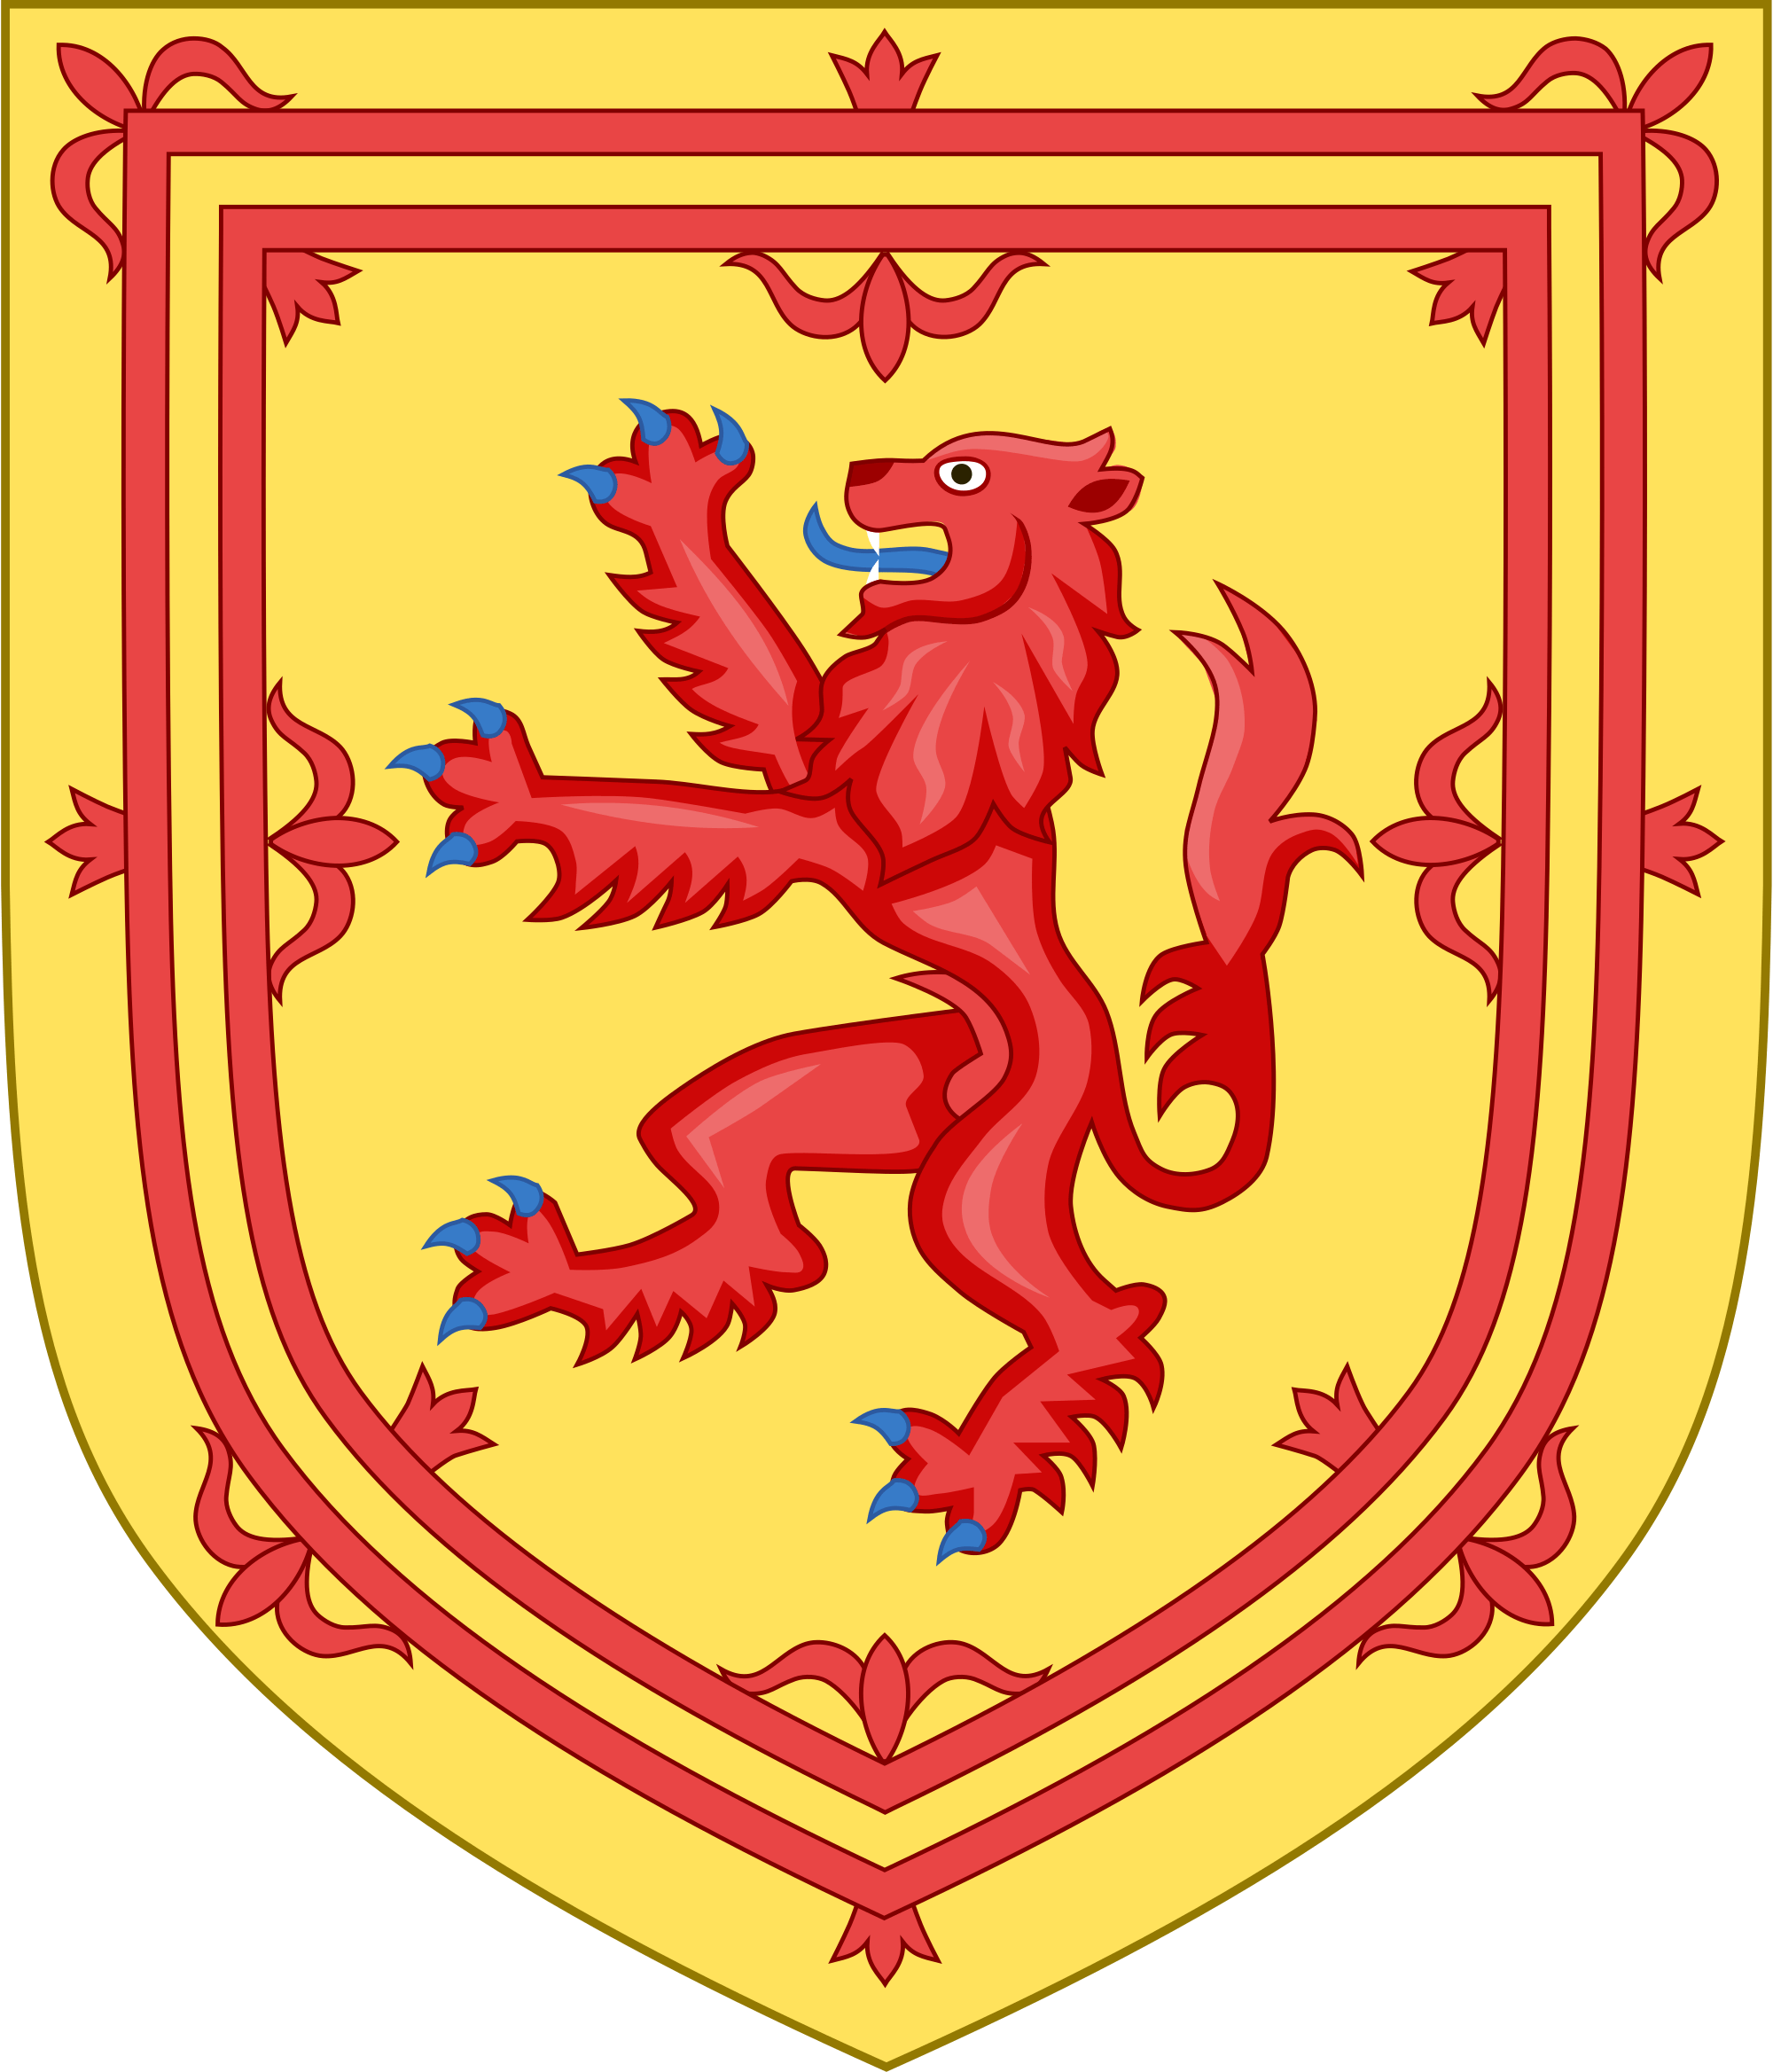 Red with Gold Lion Crown Logo - Royal Arms of Scotland